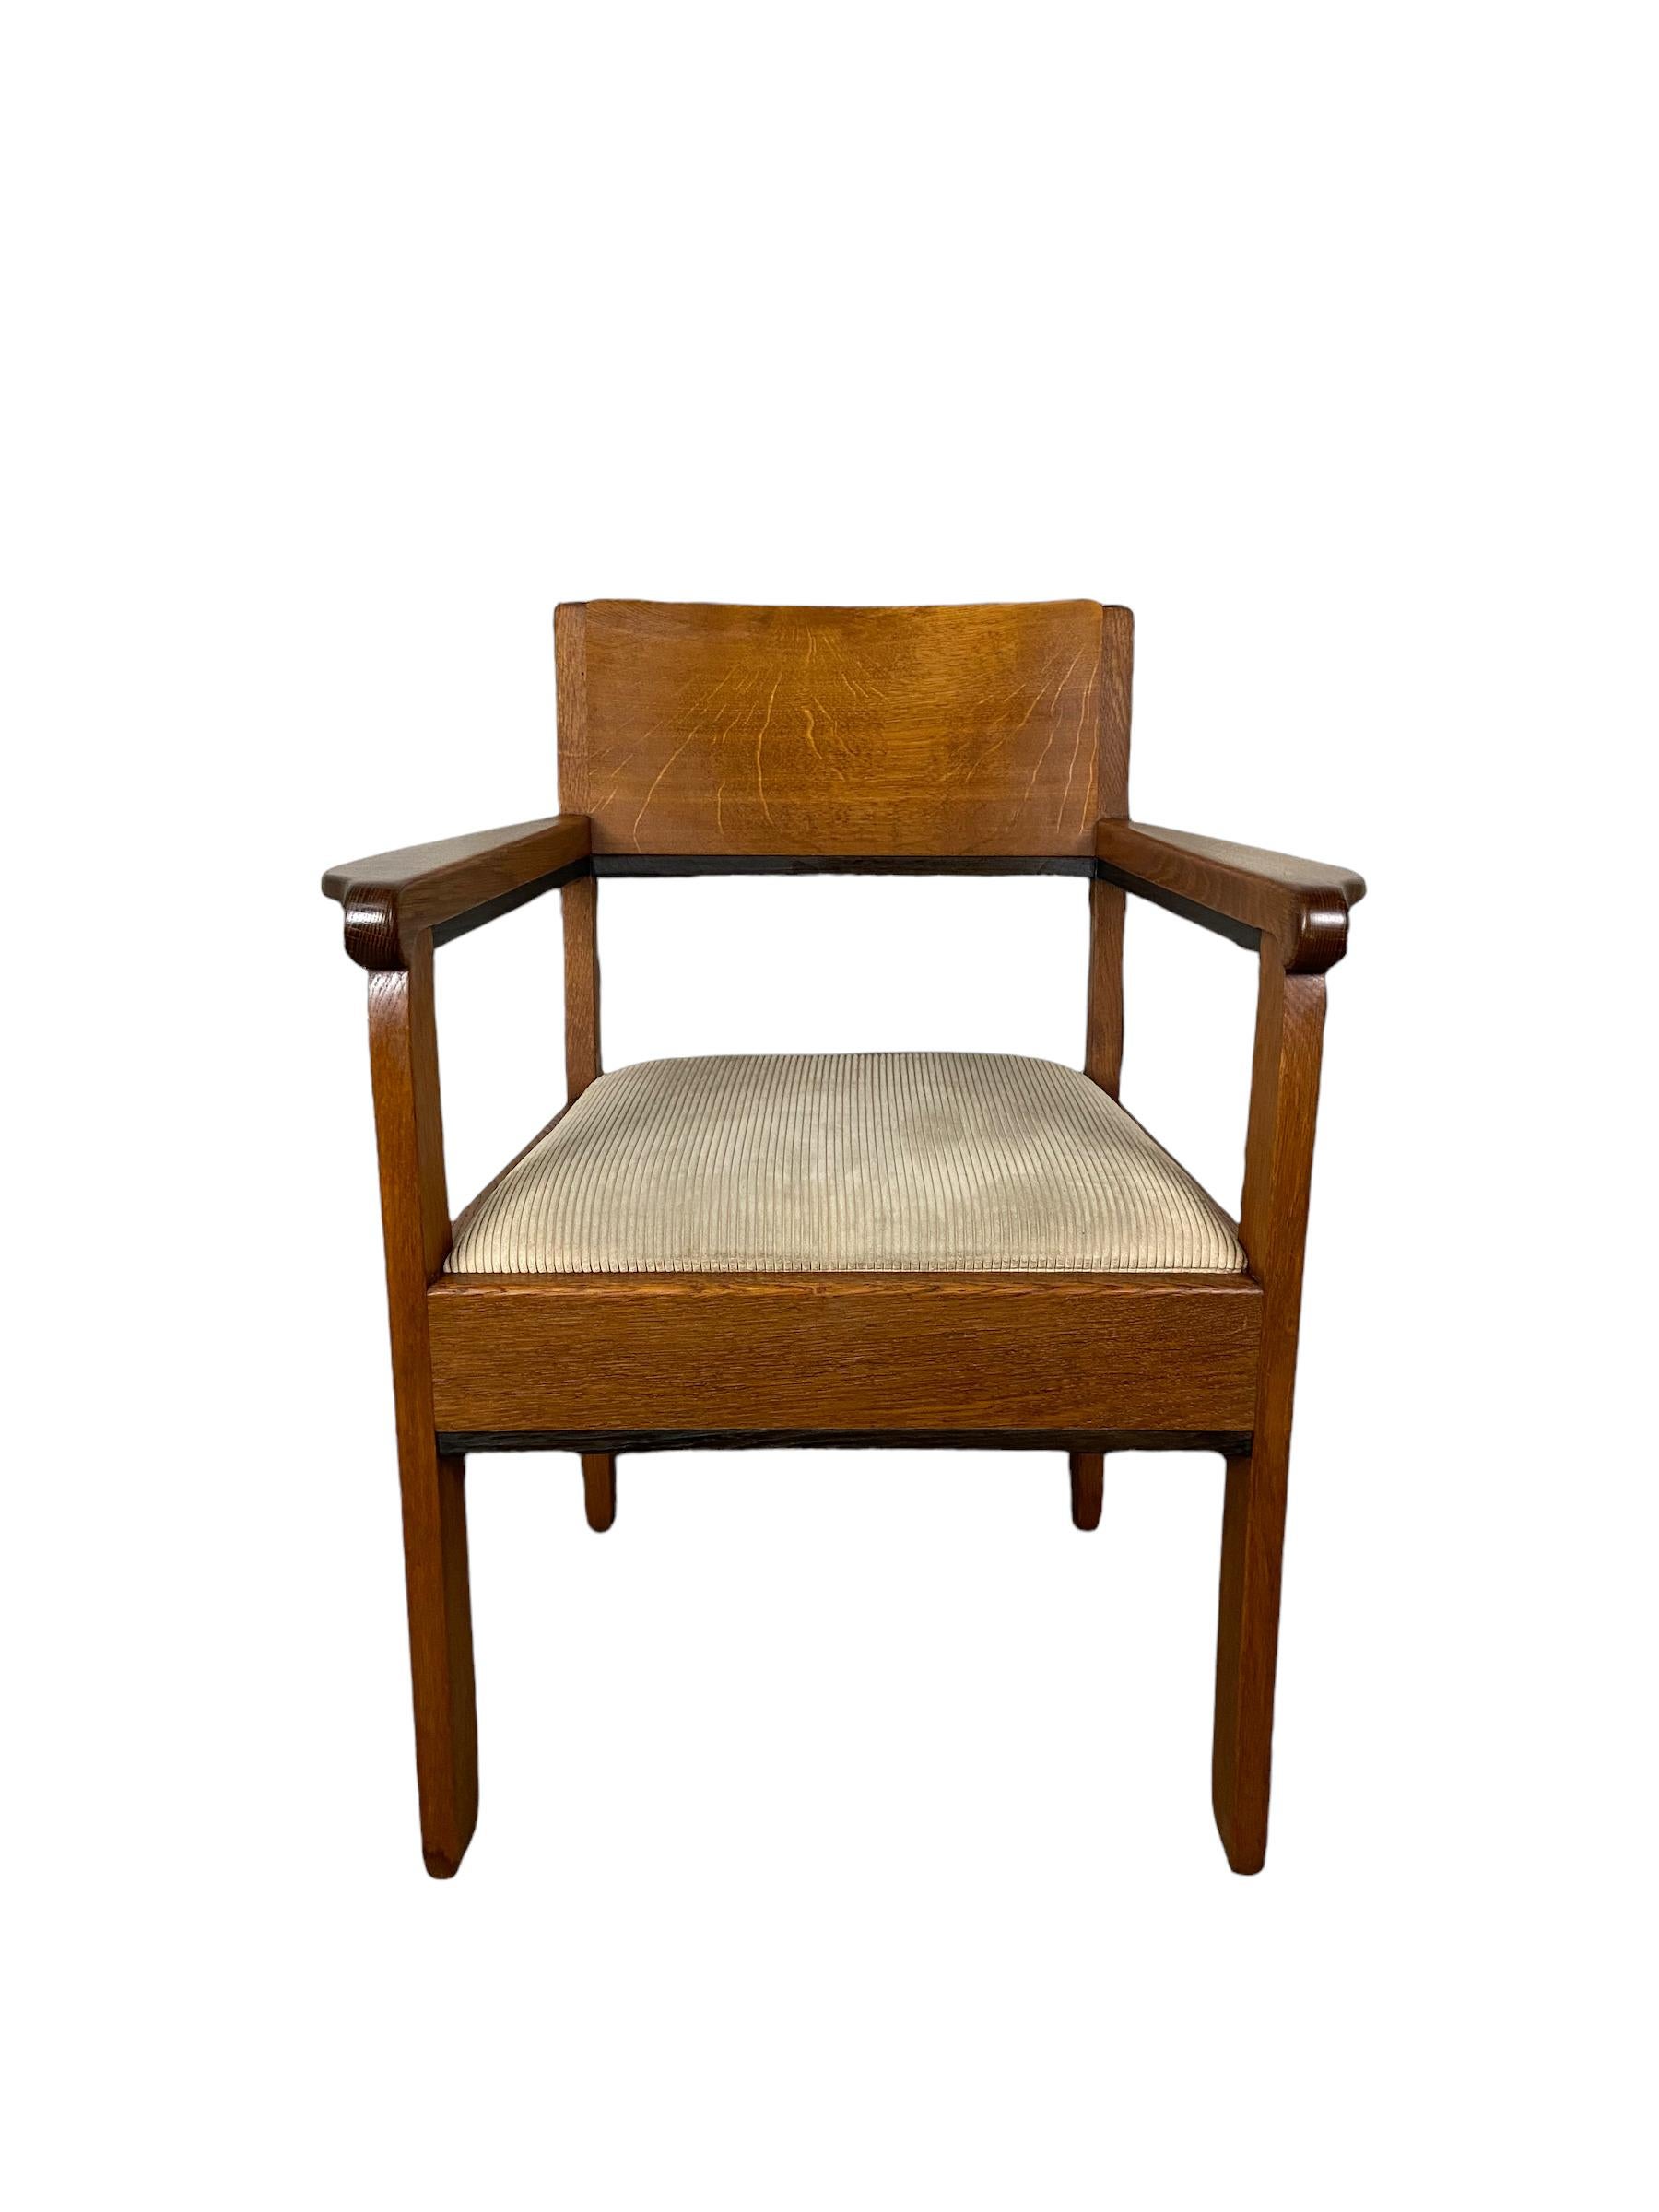 Armchair from the firm ” L.O.V. Oosterbeek ” made of oak with corduroy upholstery. This abbreviation means Labor Omnia Vincit (Work Conquers All) This factory has made a name itself in the history of the Dutch applied art. This object is in a very